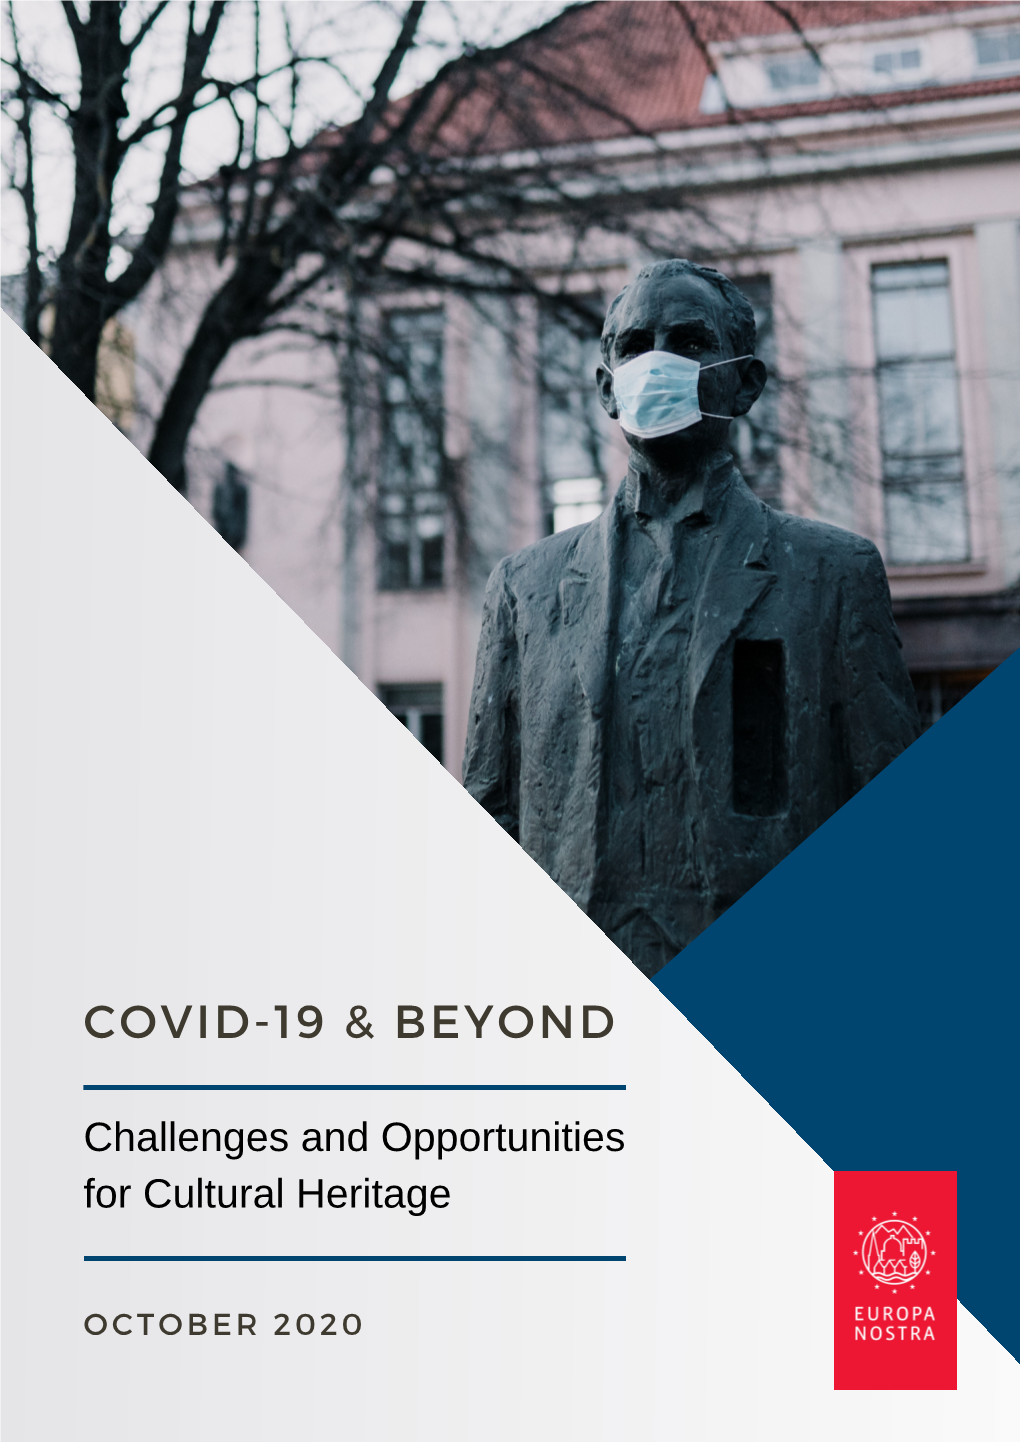 COVID-19 & BEYOND: Challenges and Opportunities for Cultural